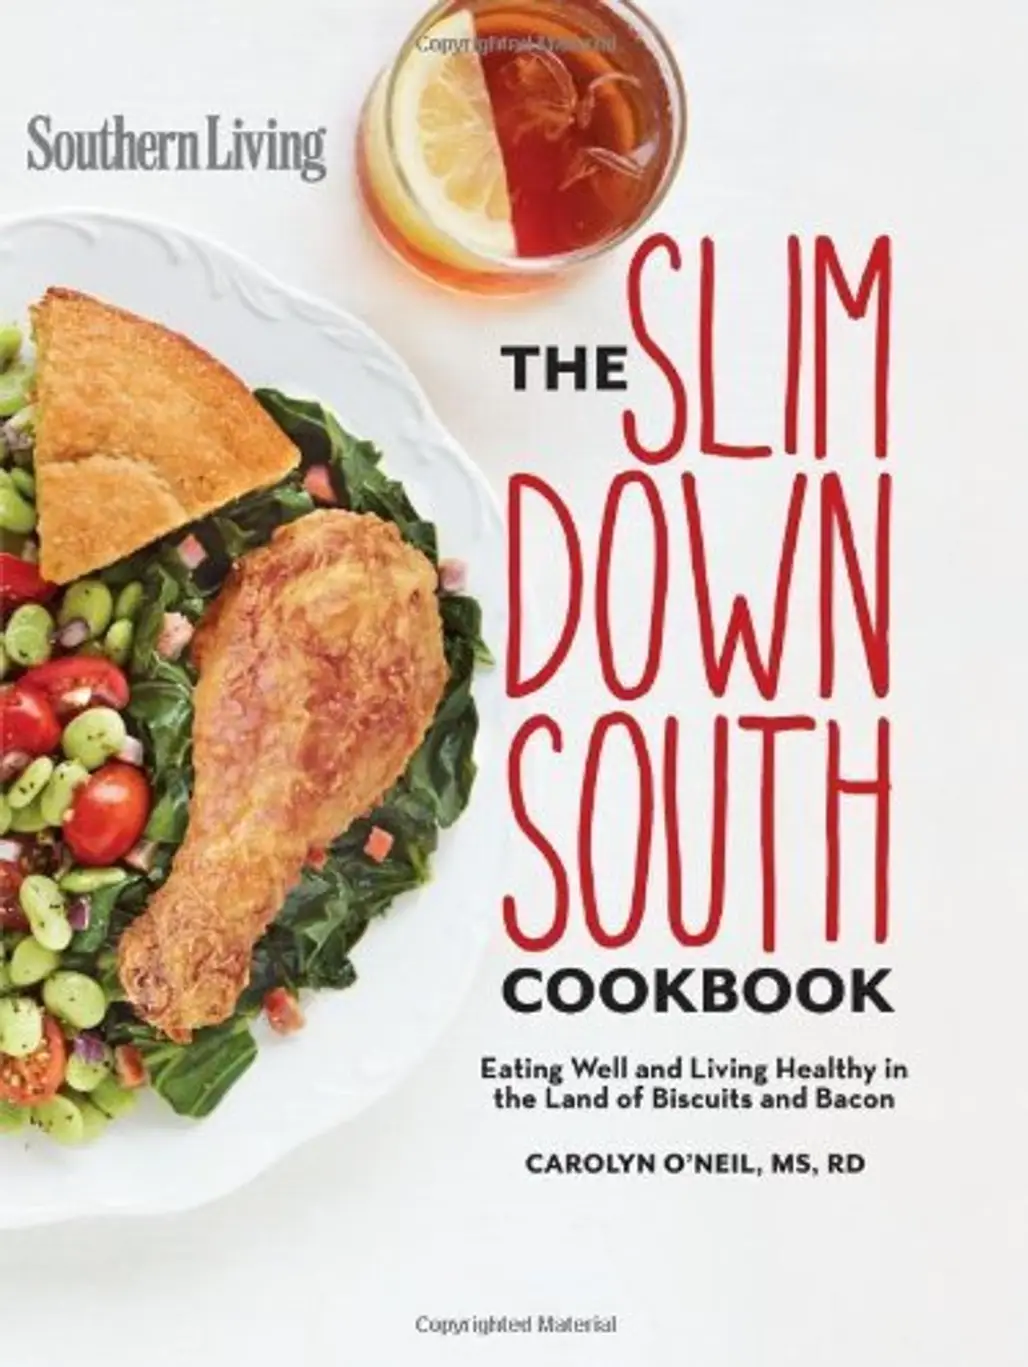 Southern Living Slim down South Cookbook by Carolyn O'Neil